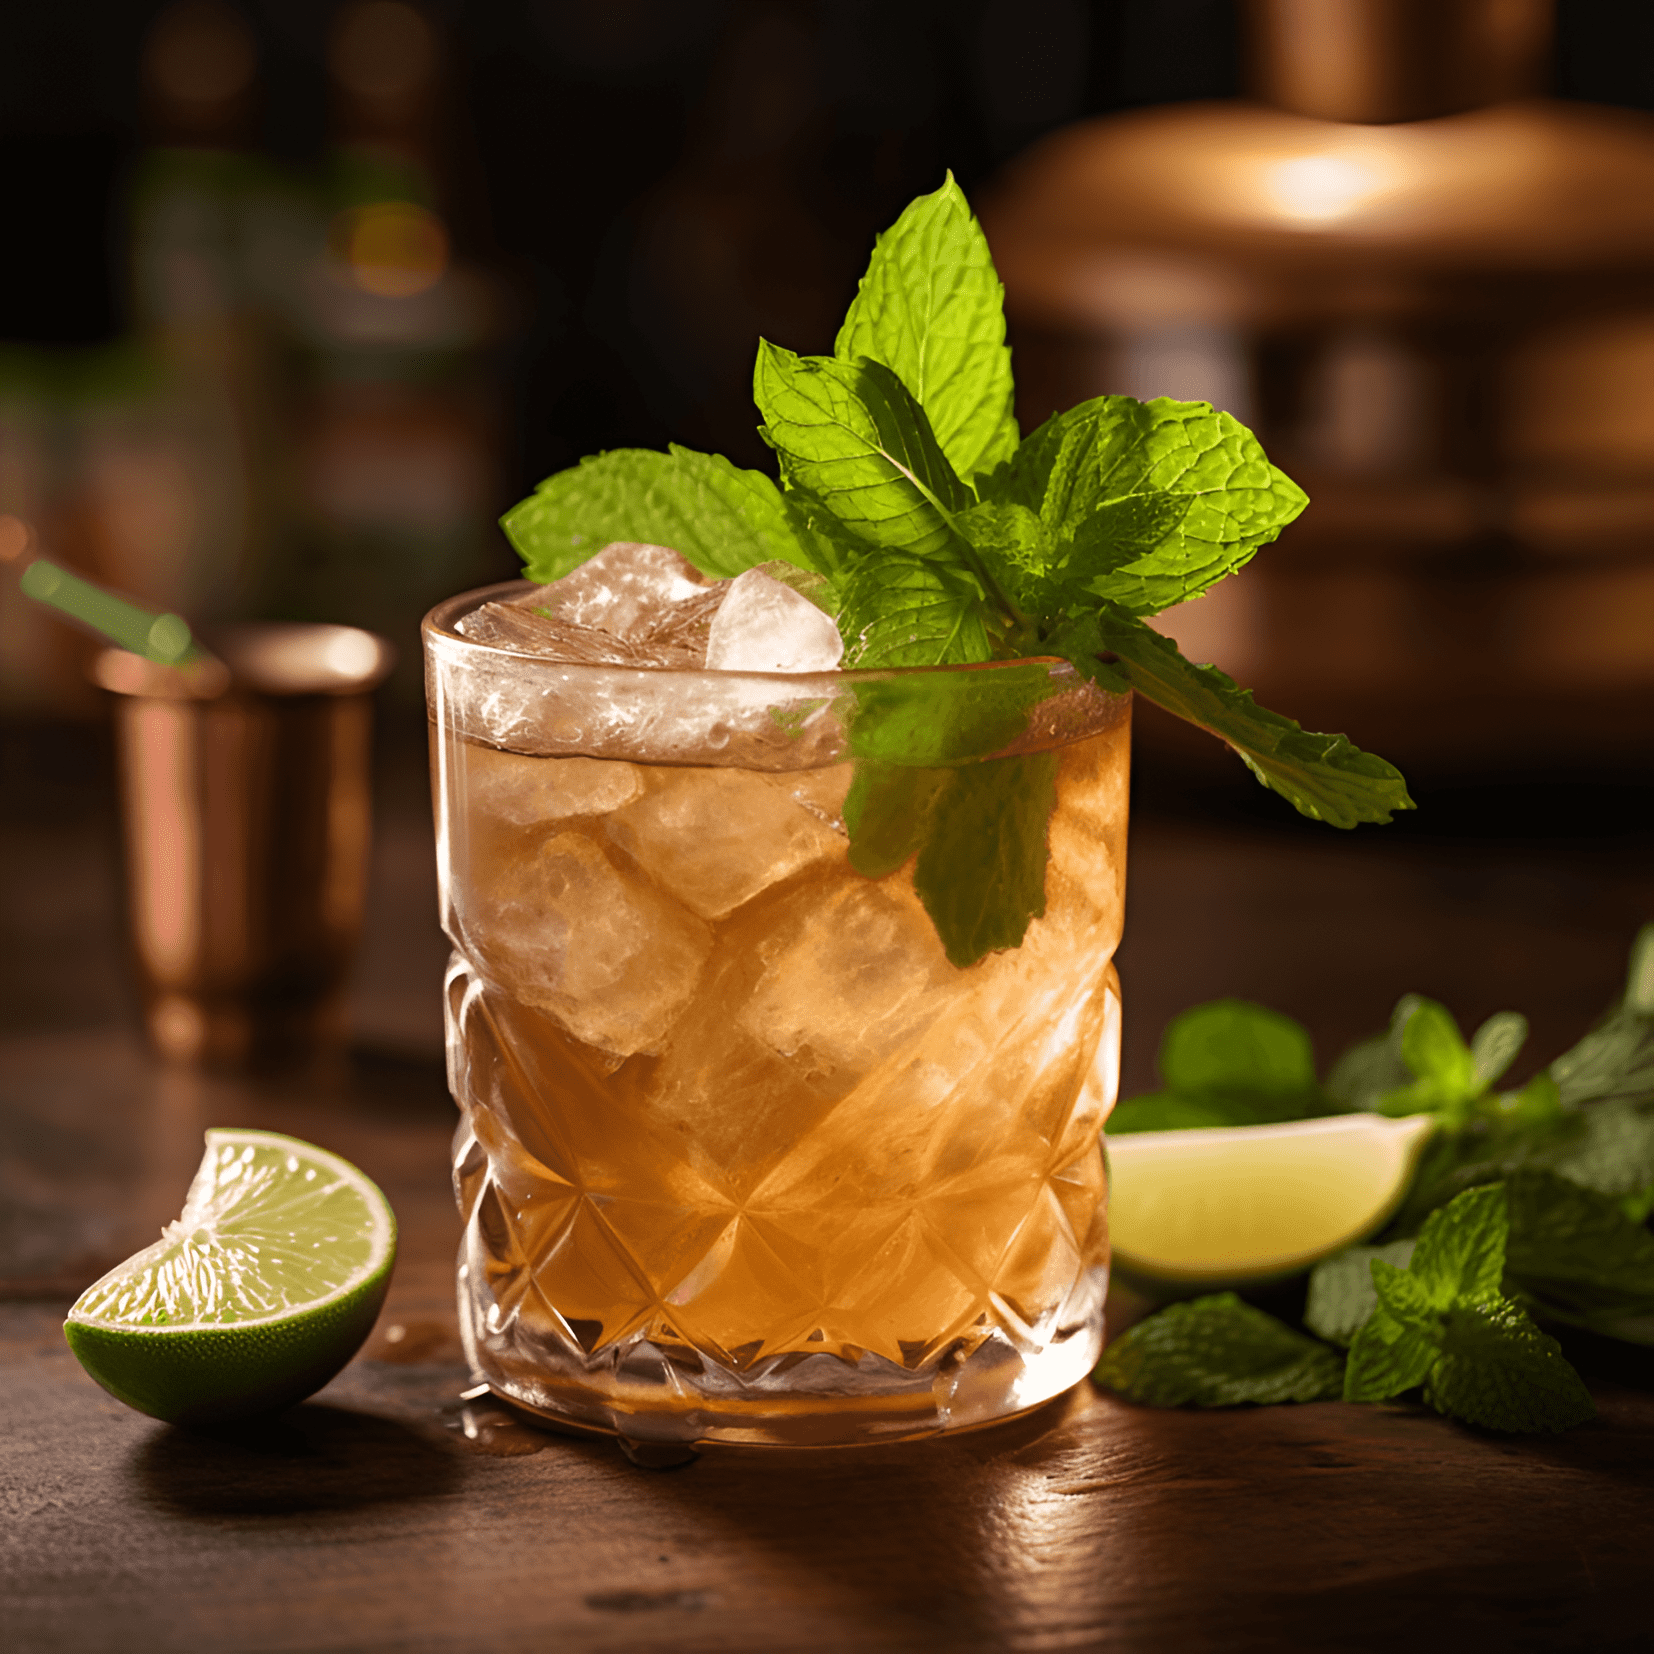 Wild Turkey Cocktail Recipe - The Wild Turkey cocktail has a robust, full-bodied flavor with notes of caramel, vanilla, and oak. It's slightly sweet, with a touch of spice and a warming, smooth finish. The bourbon takes center stage, while the other ingredients add depth and complexity.